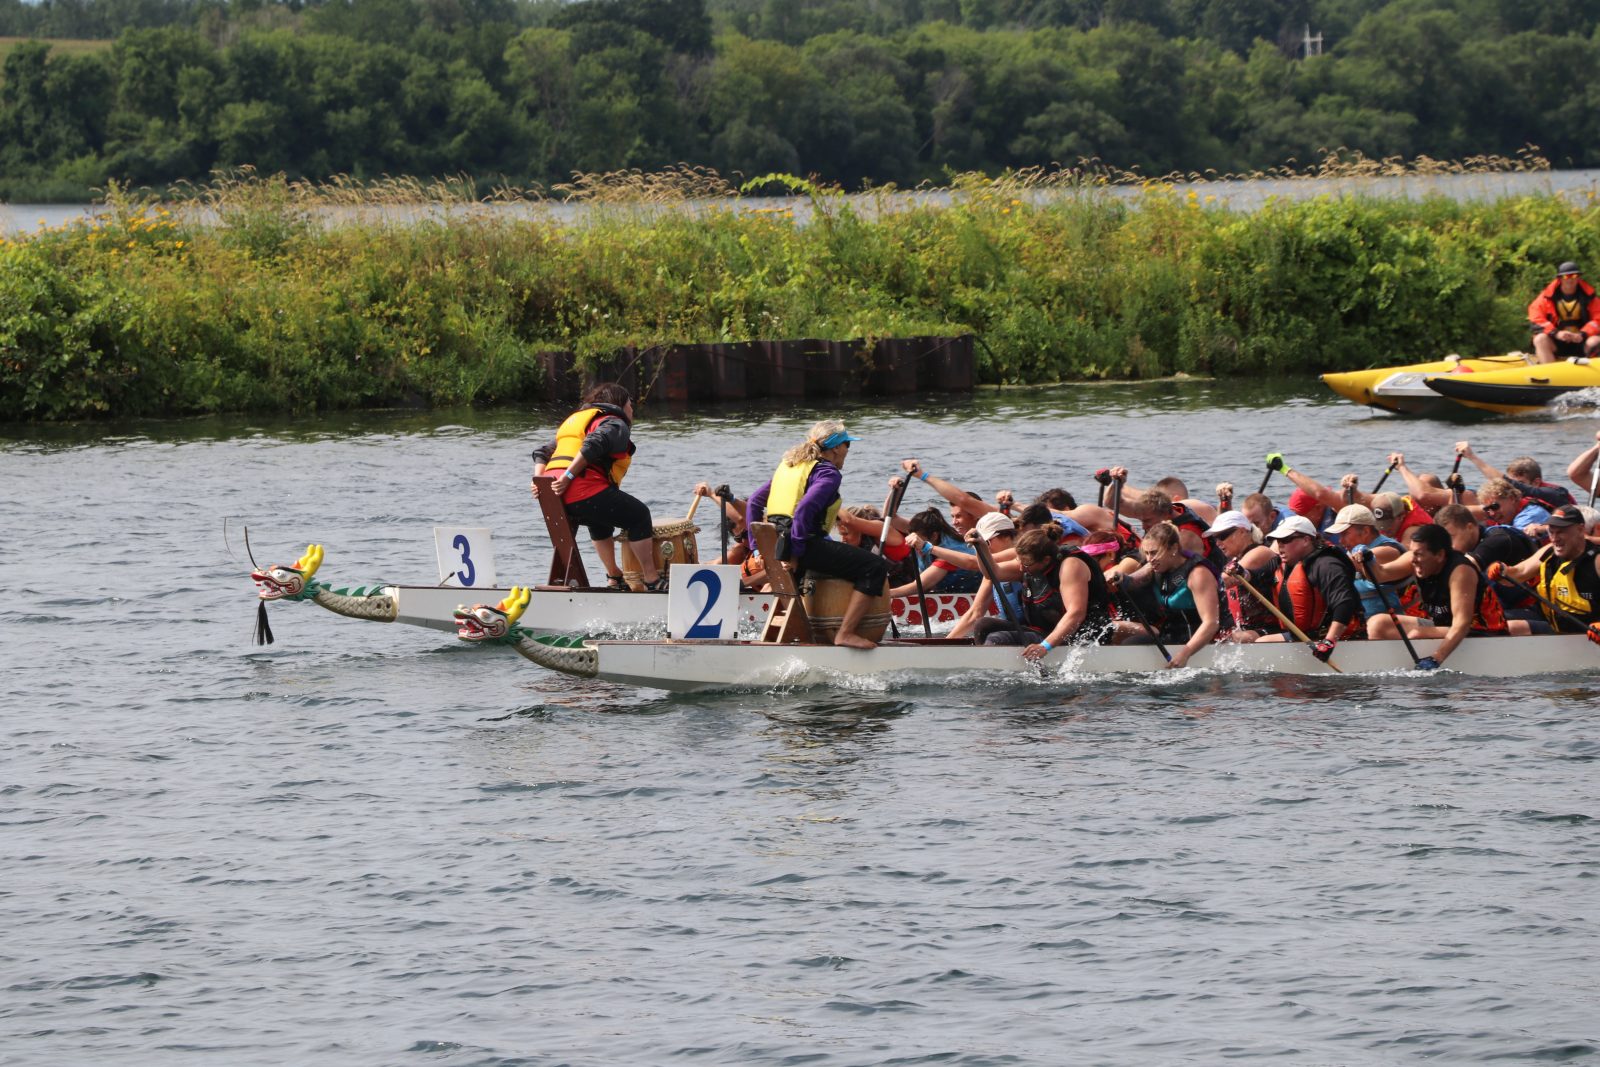 Cornwall Waterfest Dragon Boat races returning to the Canal this August